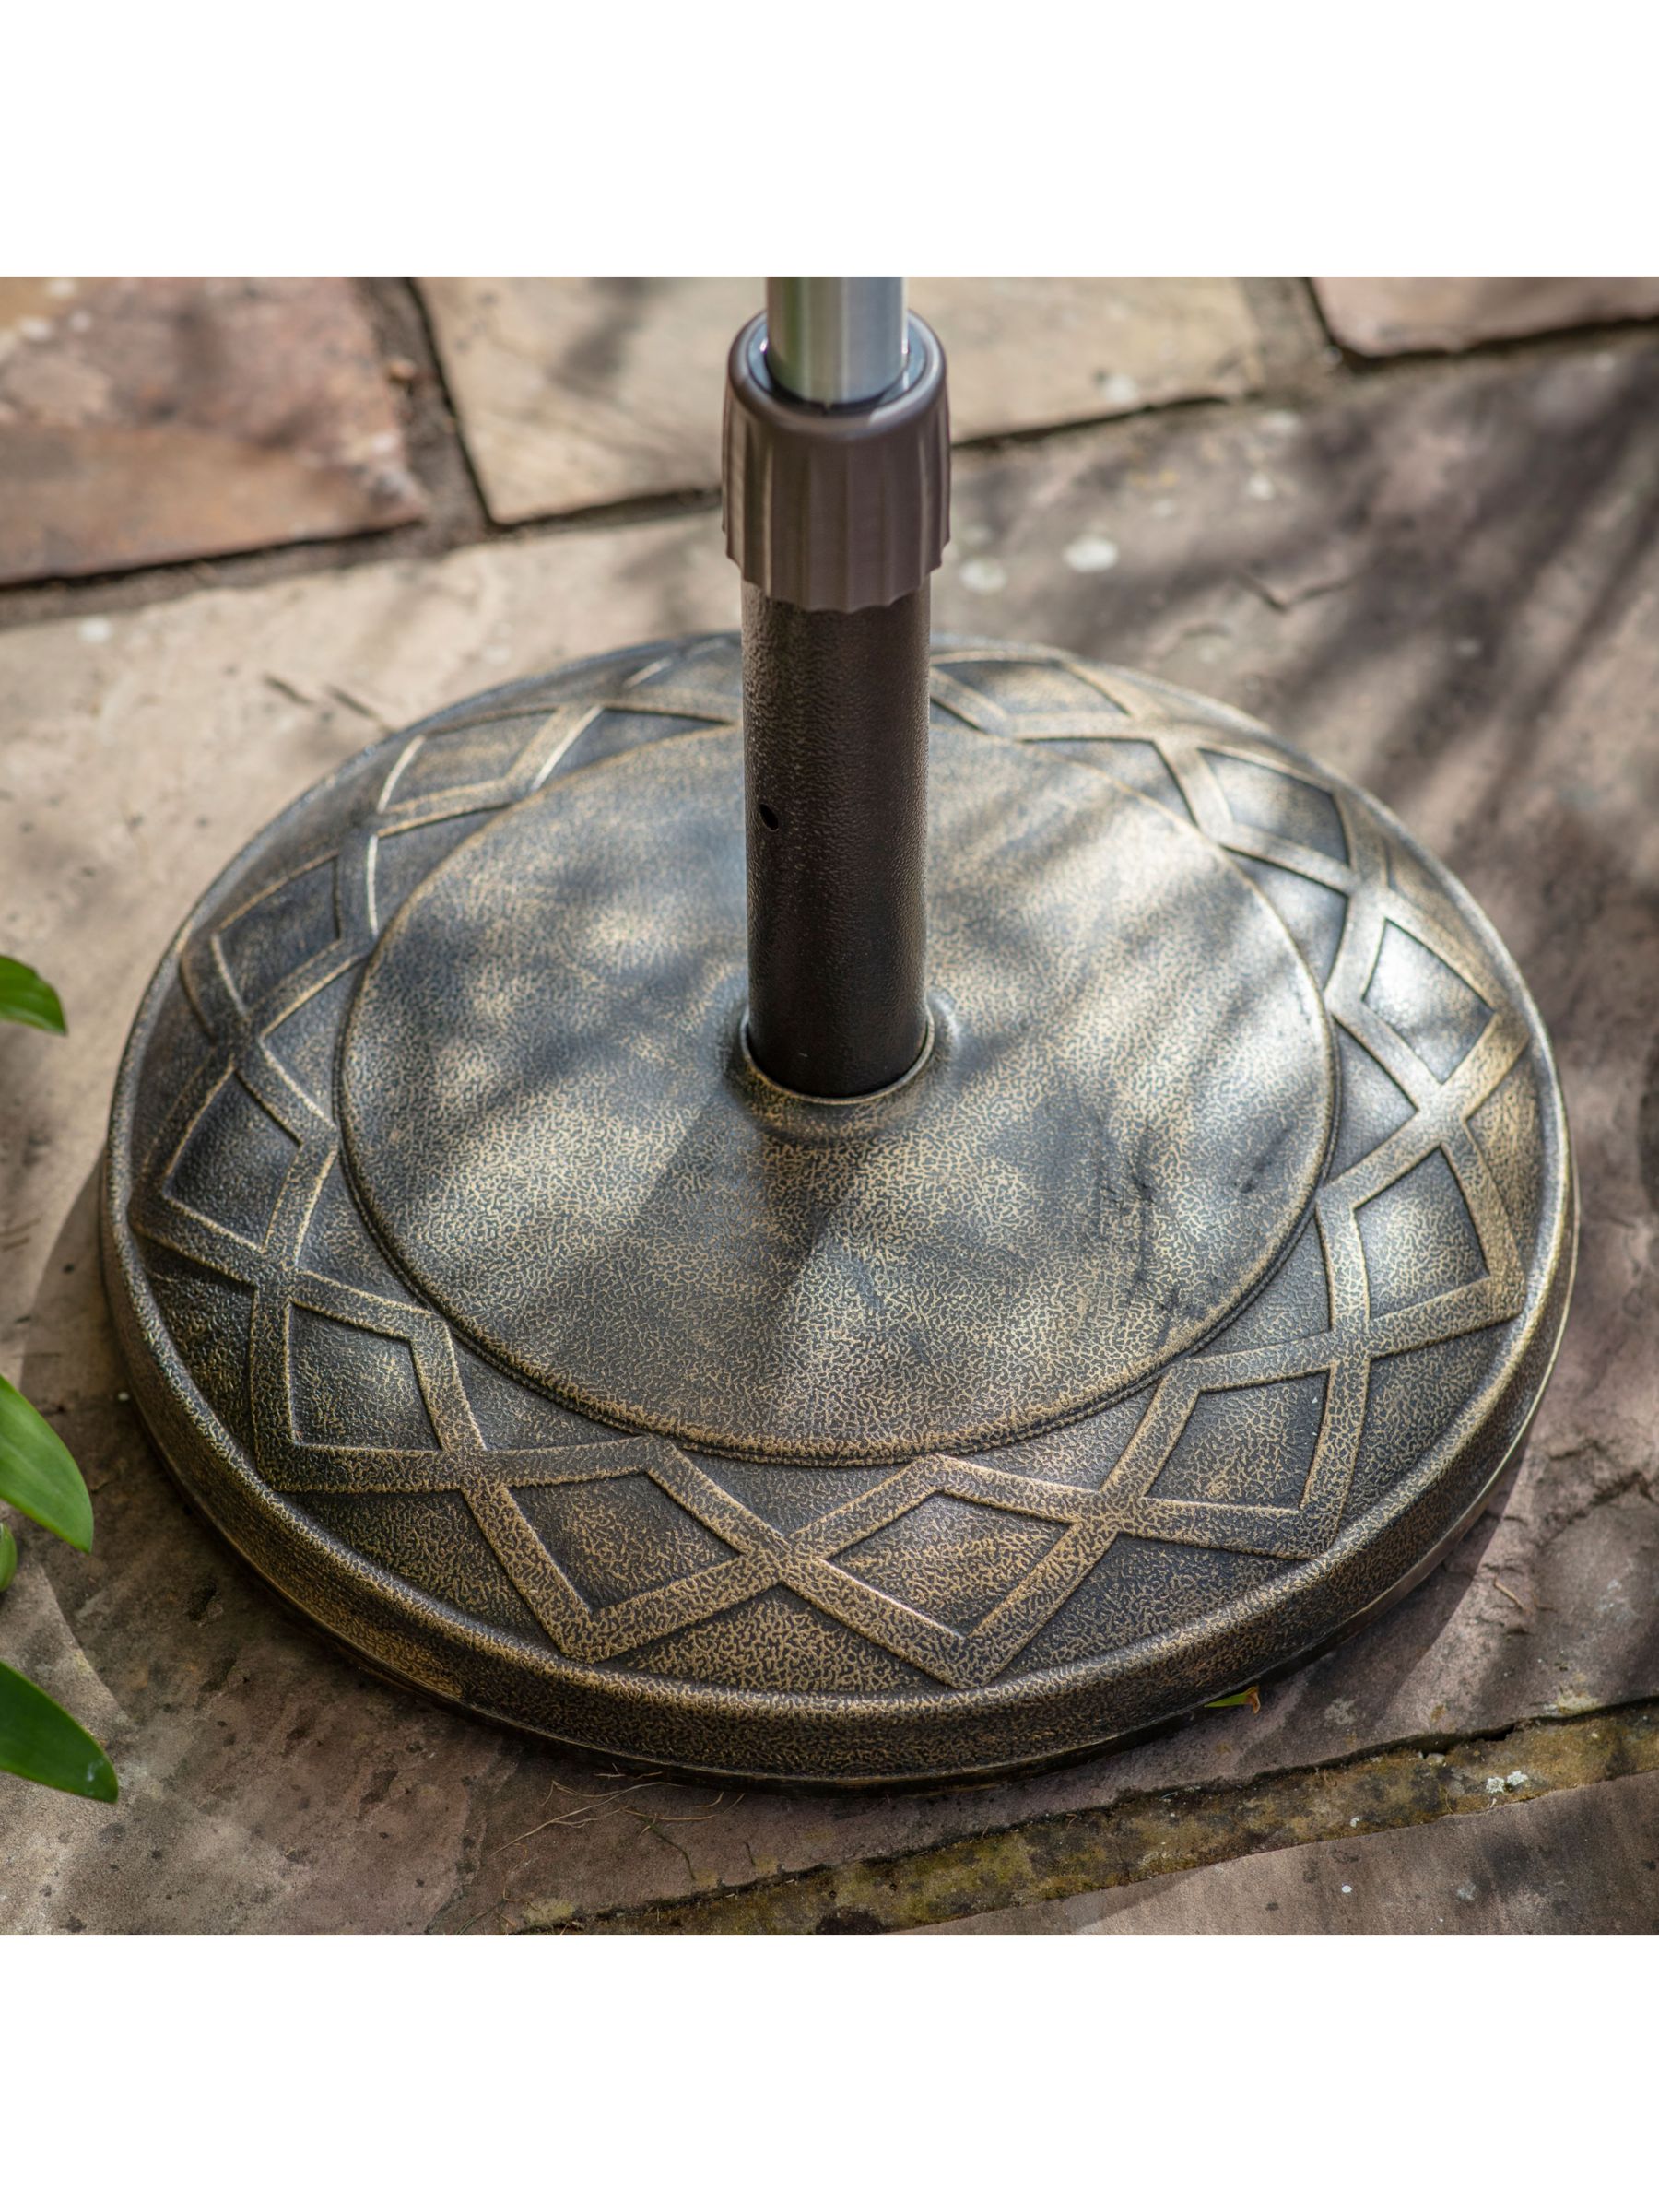 Photo of Gallery direct viali parasol base weight 20kg aged brass